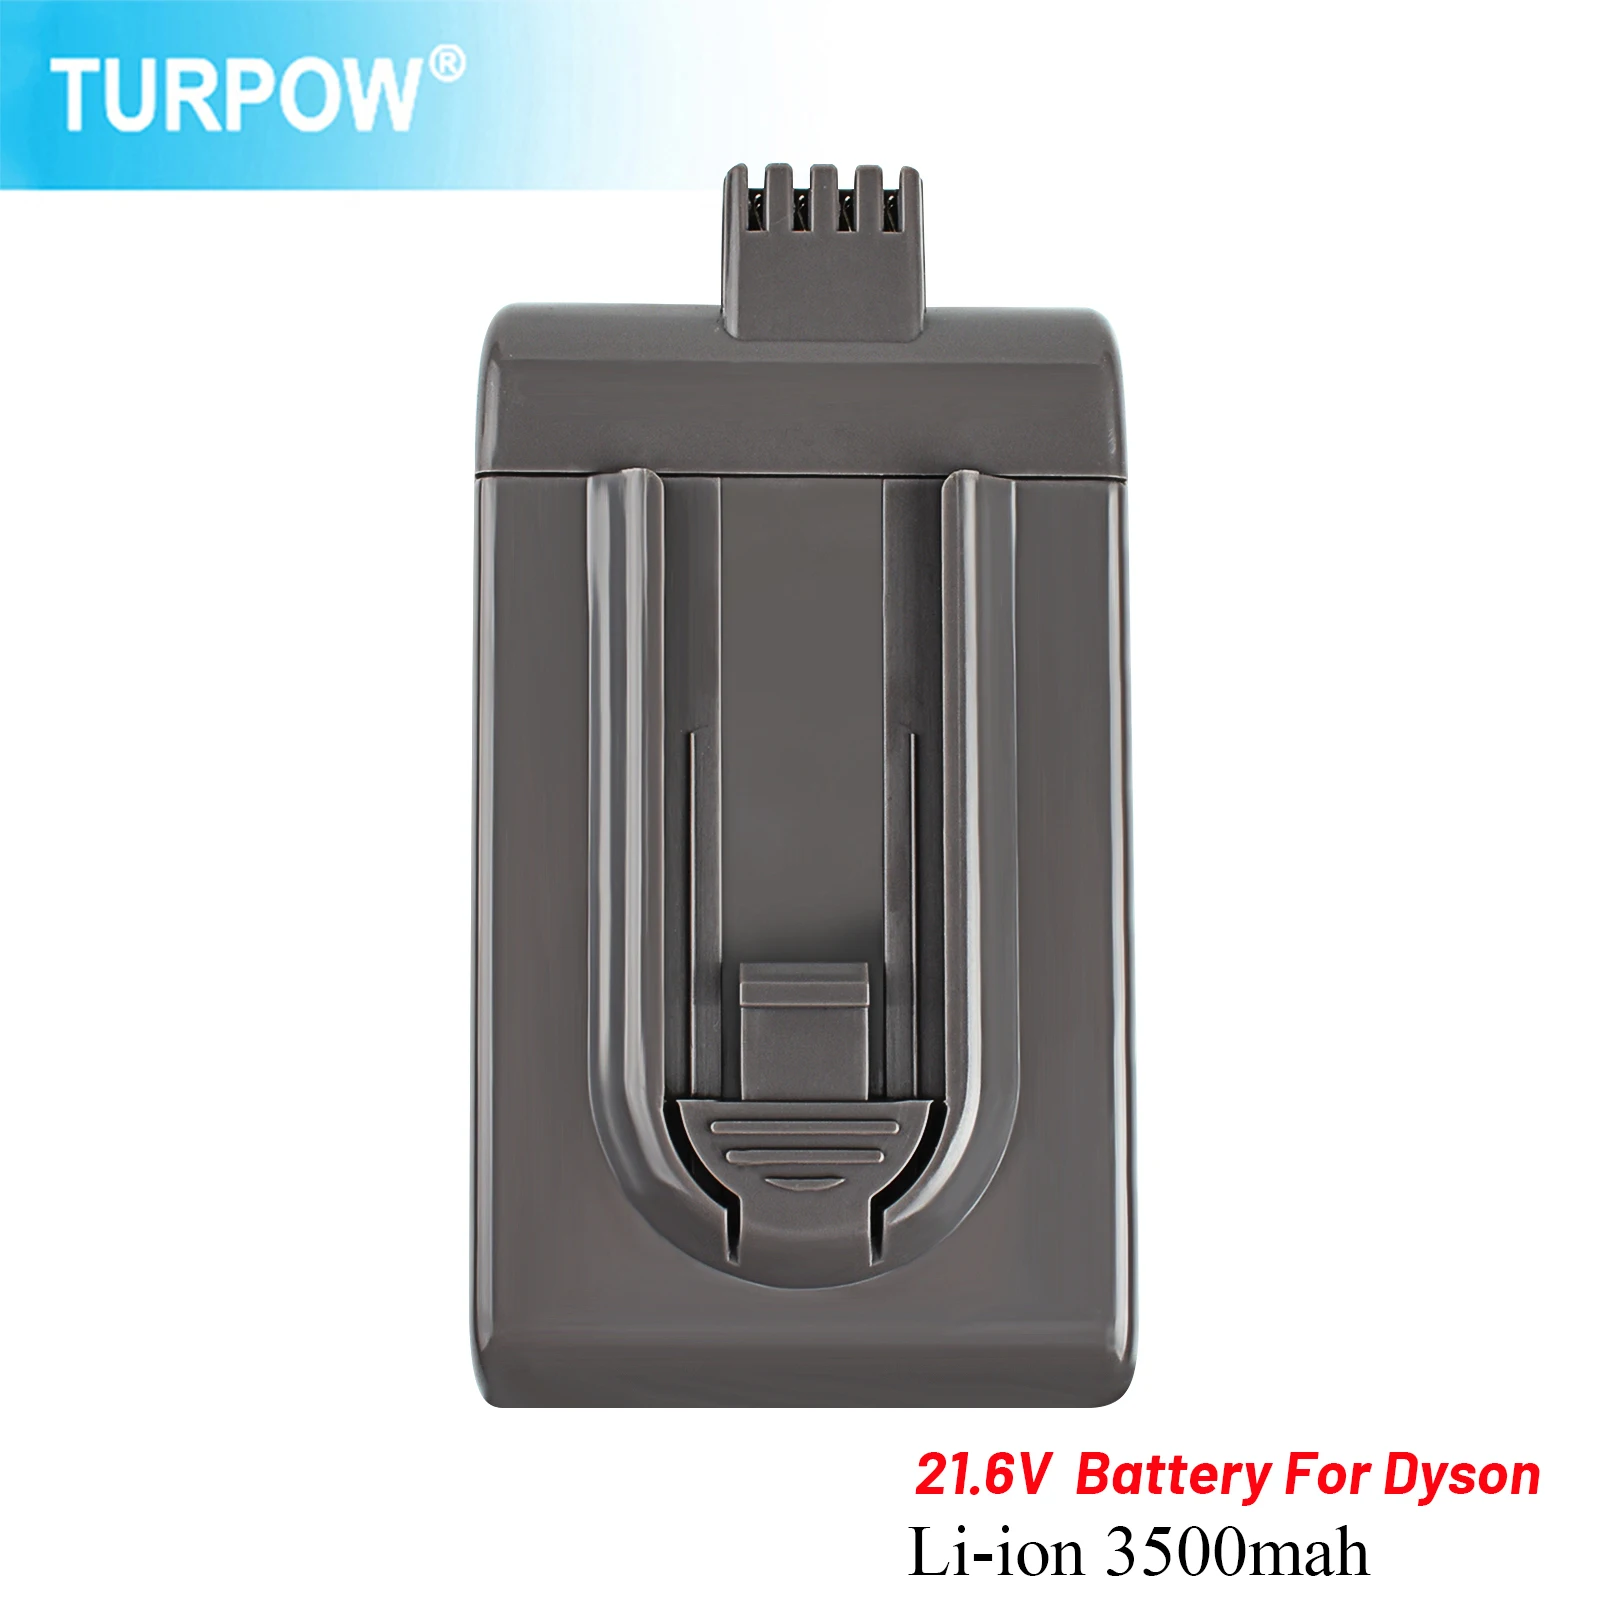 

Turpow 21.6V 3500mAh Rechargeable Battery Li-ion for Dyson Vacuum Cleaner Battery DC16 DC12 BP-01 12097 912433-01